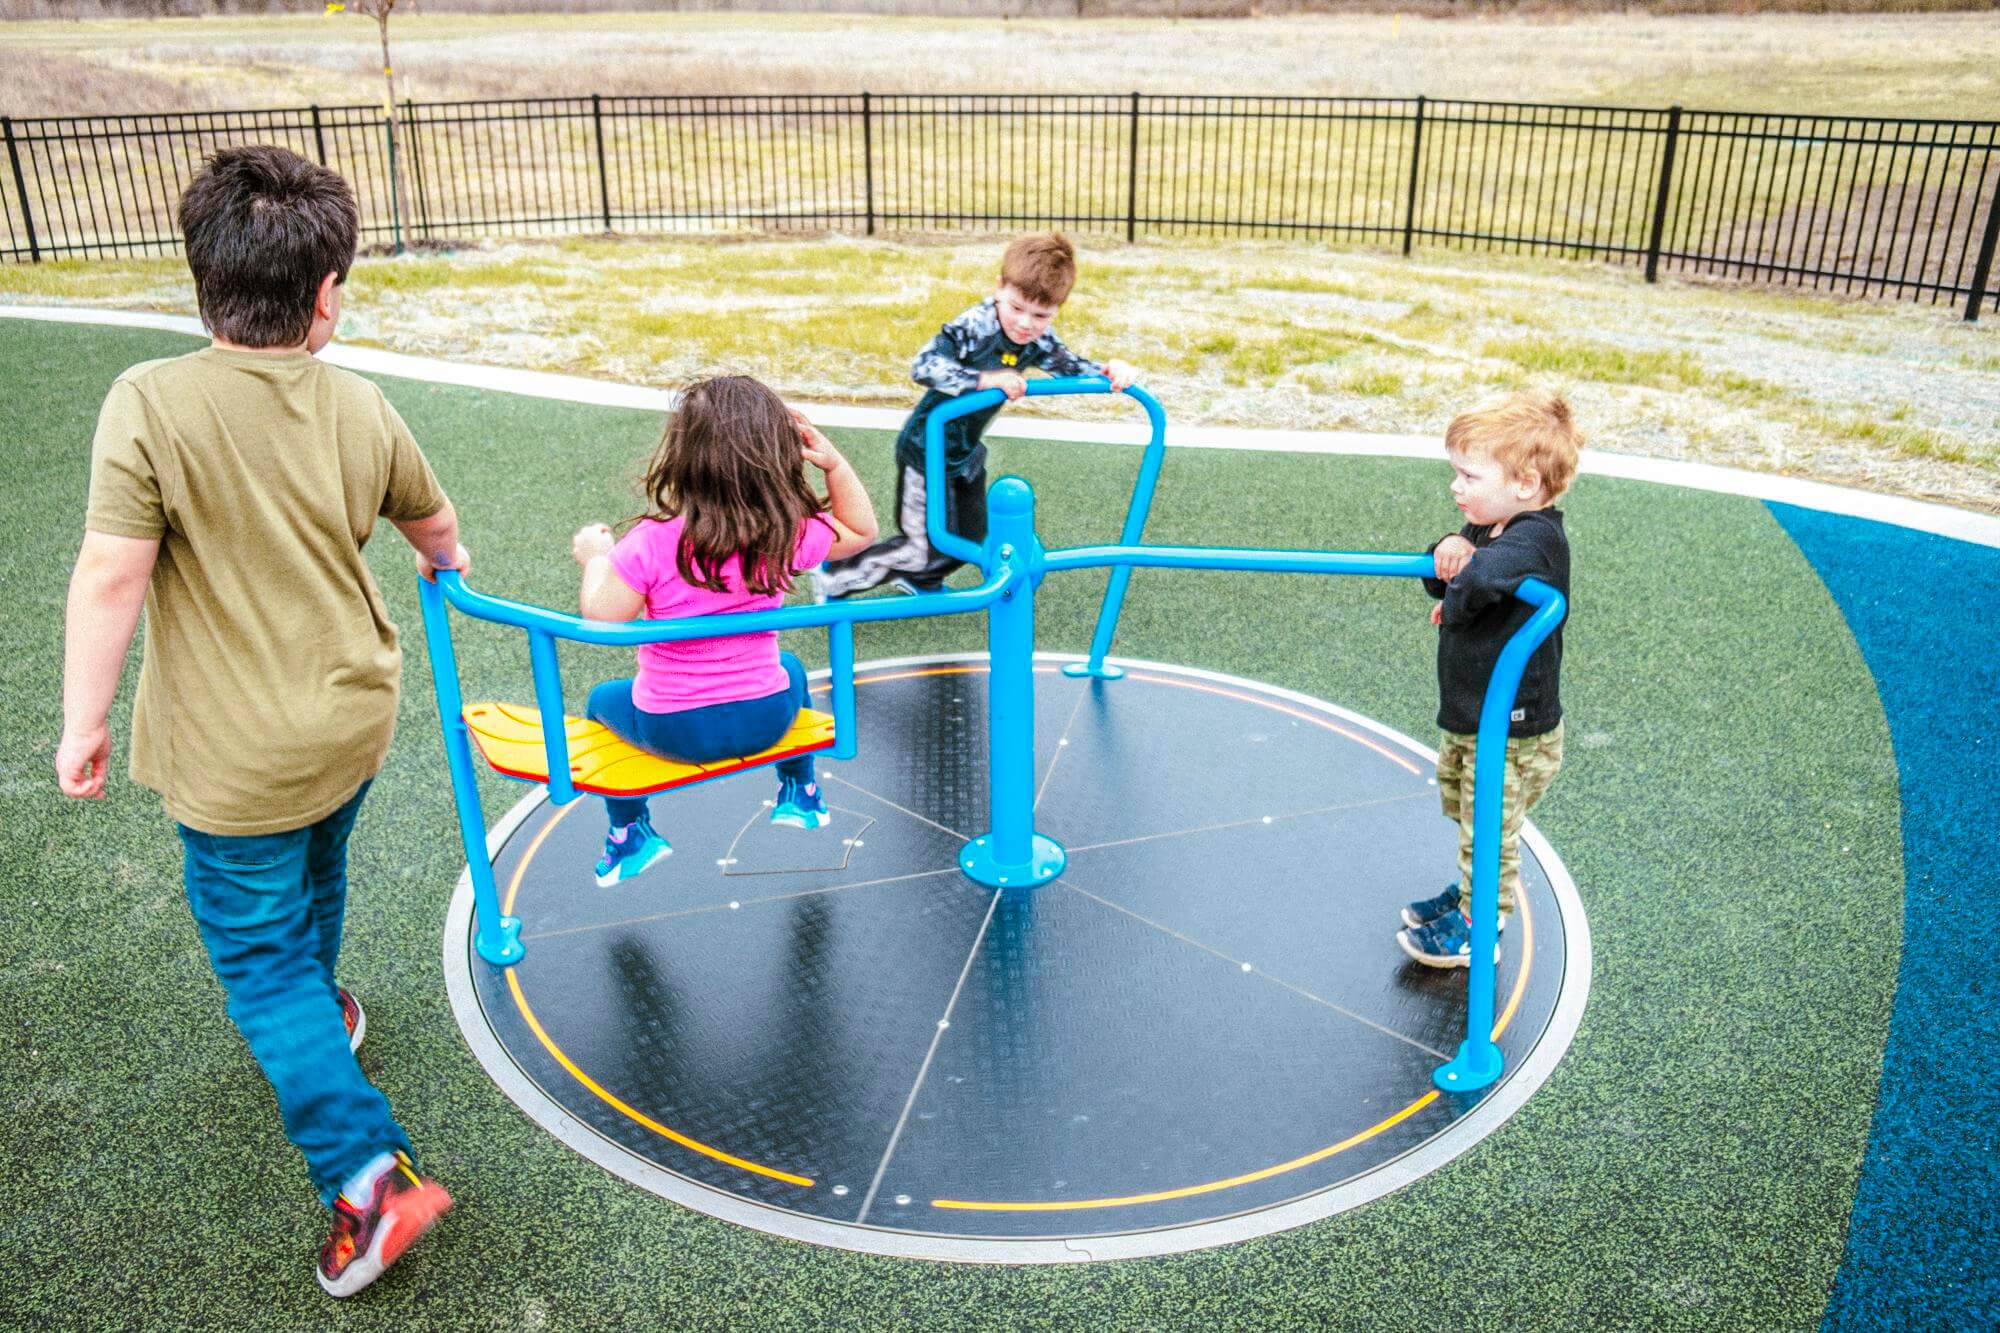 Children play on a round, spinning platform with blue handrails on a playground with green synthetic turf and a blue path.